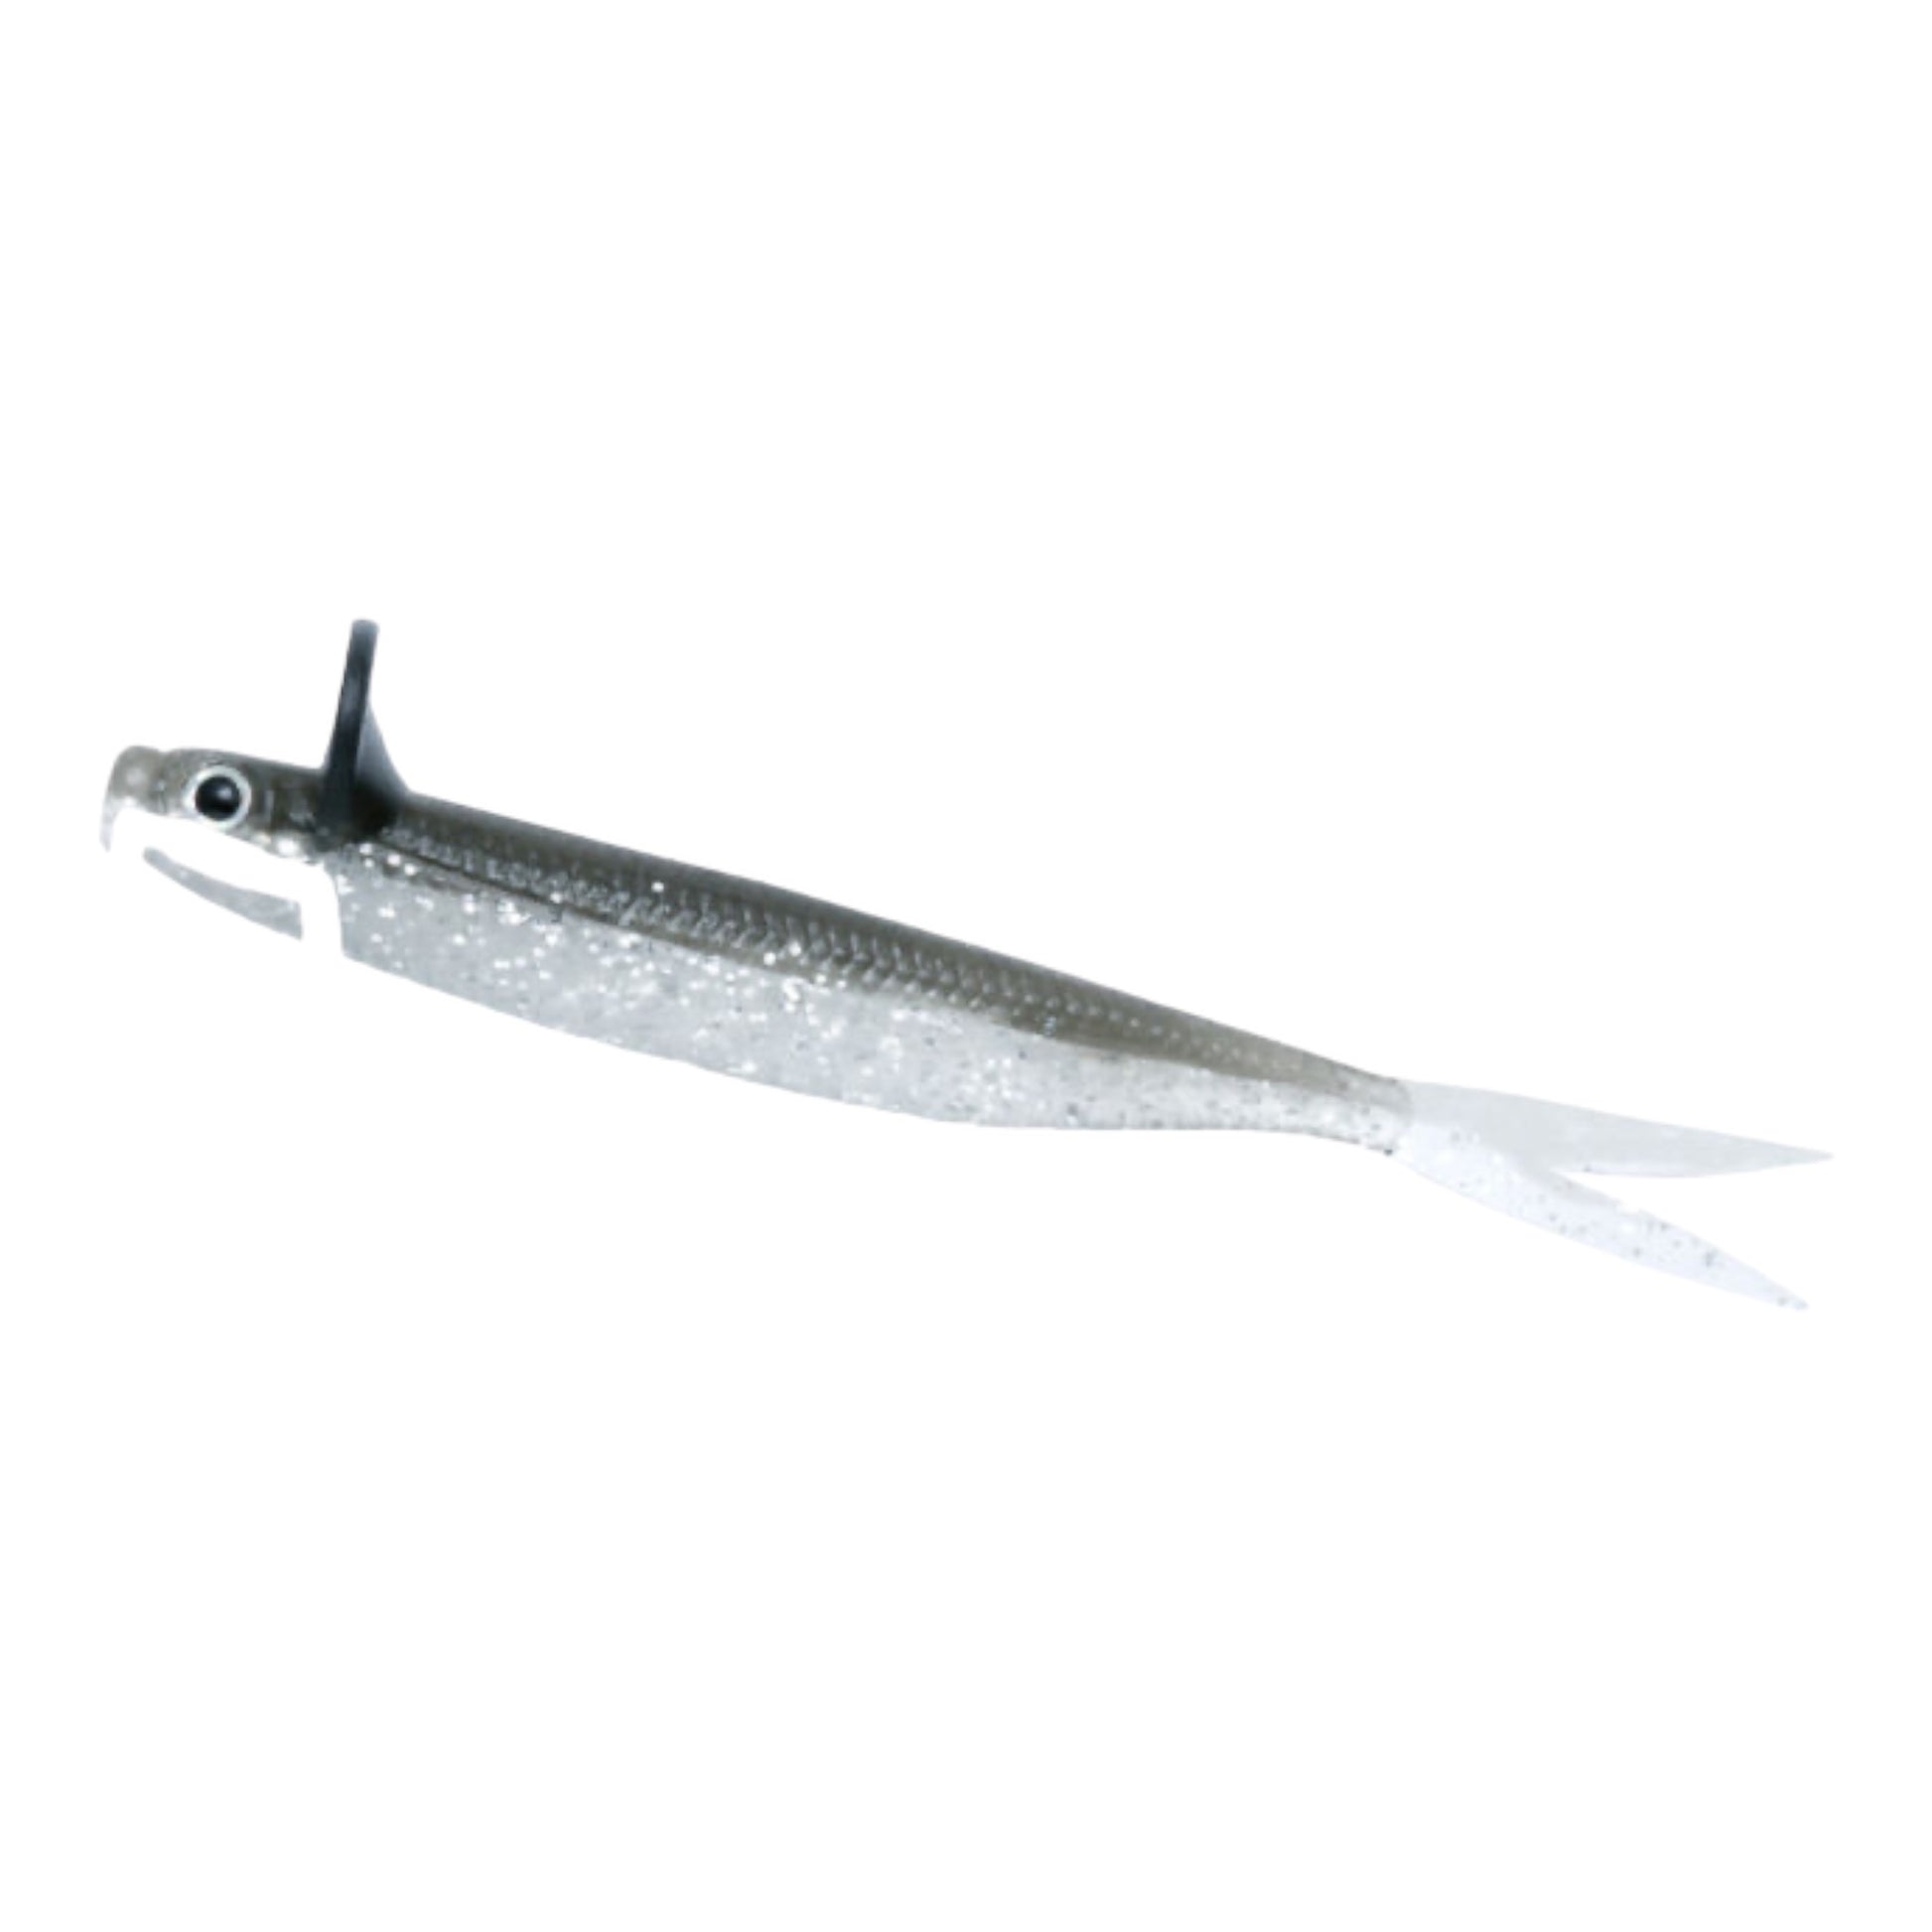 Excellent quality and novel trends - Deps Frilled Shad